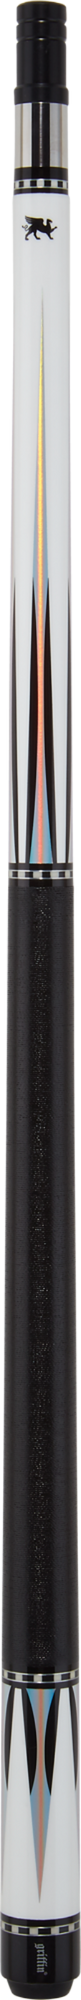 Griffin Griffin GR63 Pool Cue Pool Cue